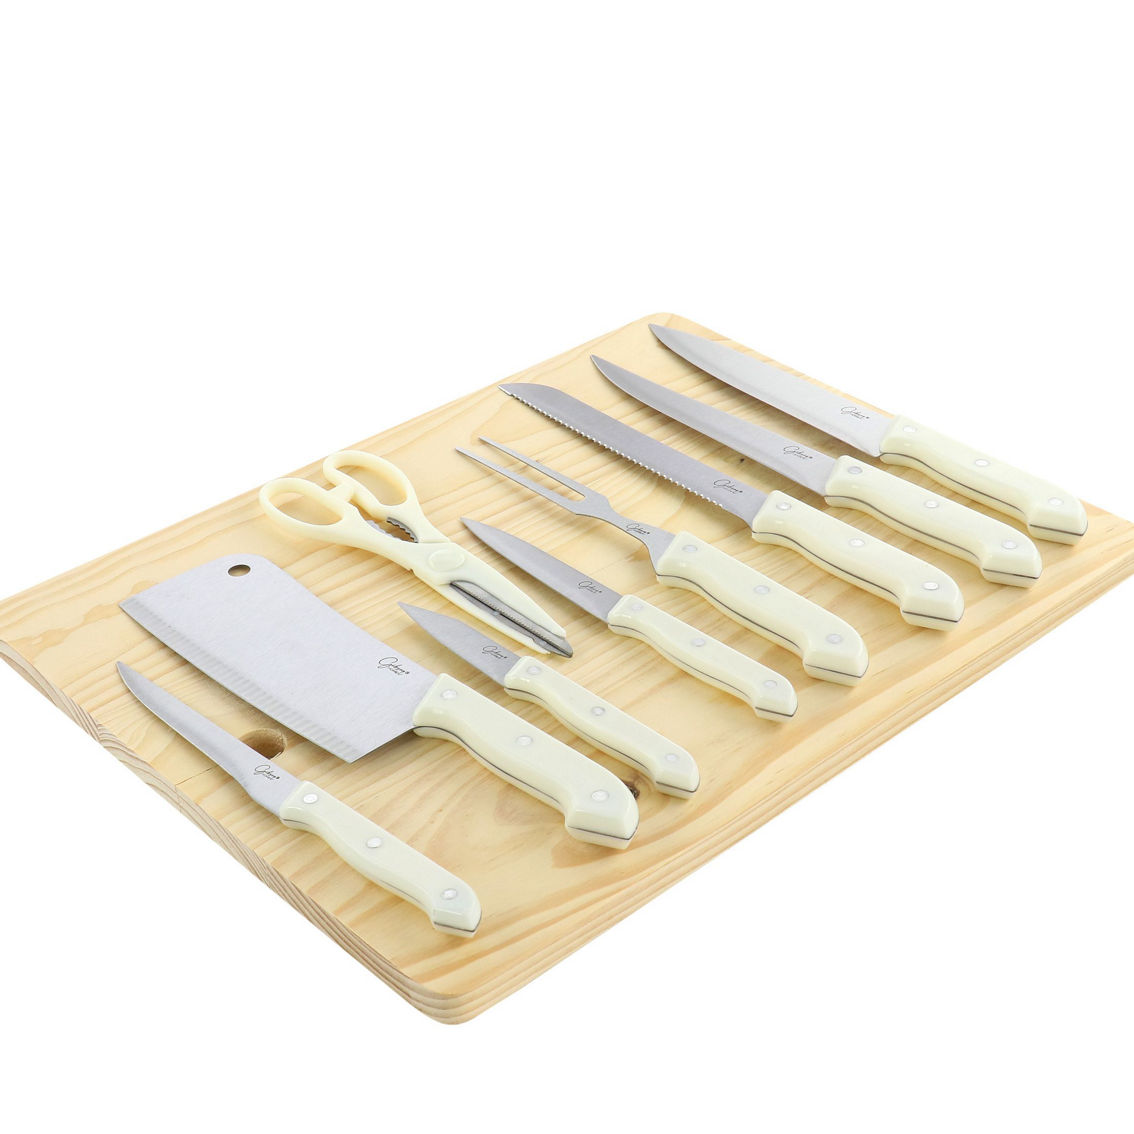 Gibson Home Wildcraft 10 Piece Cutlery Set With Cutting Board - Image 2 of 5